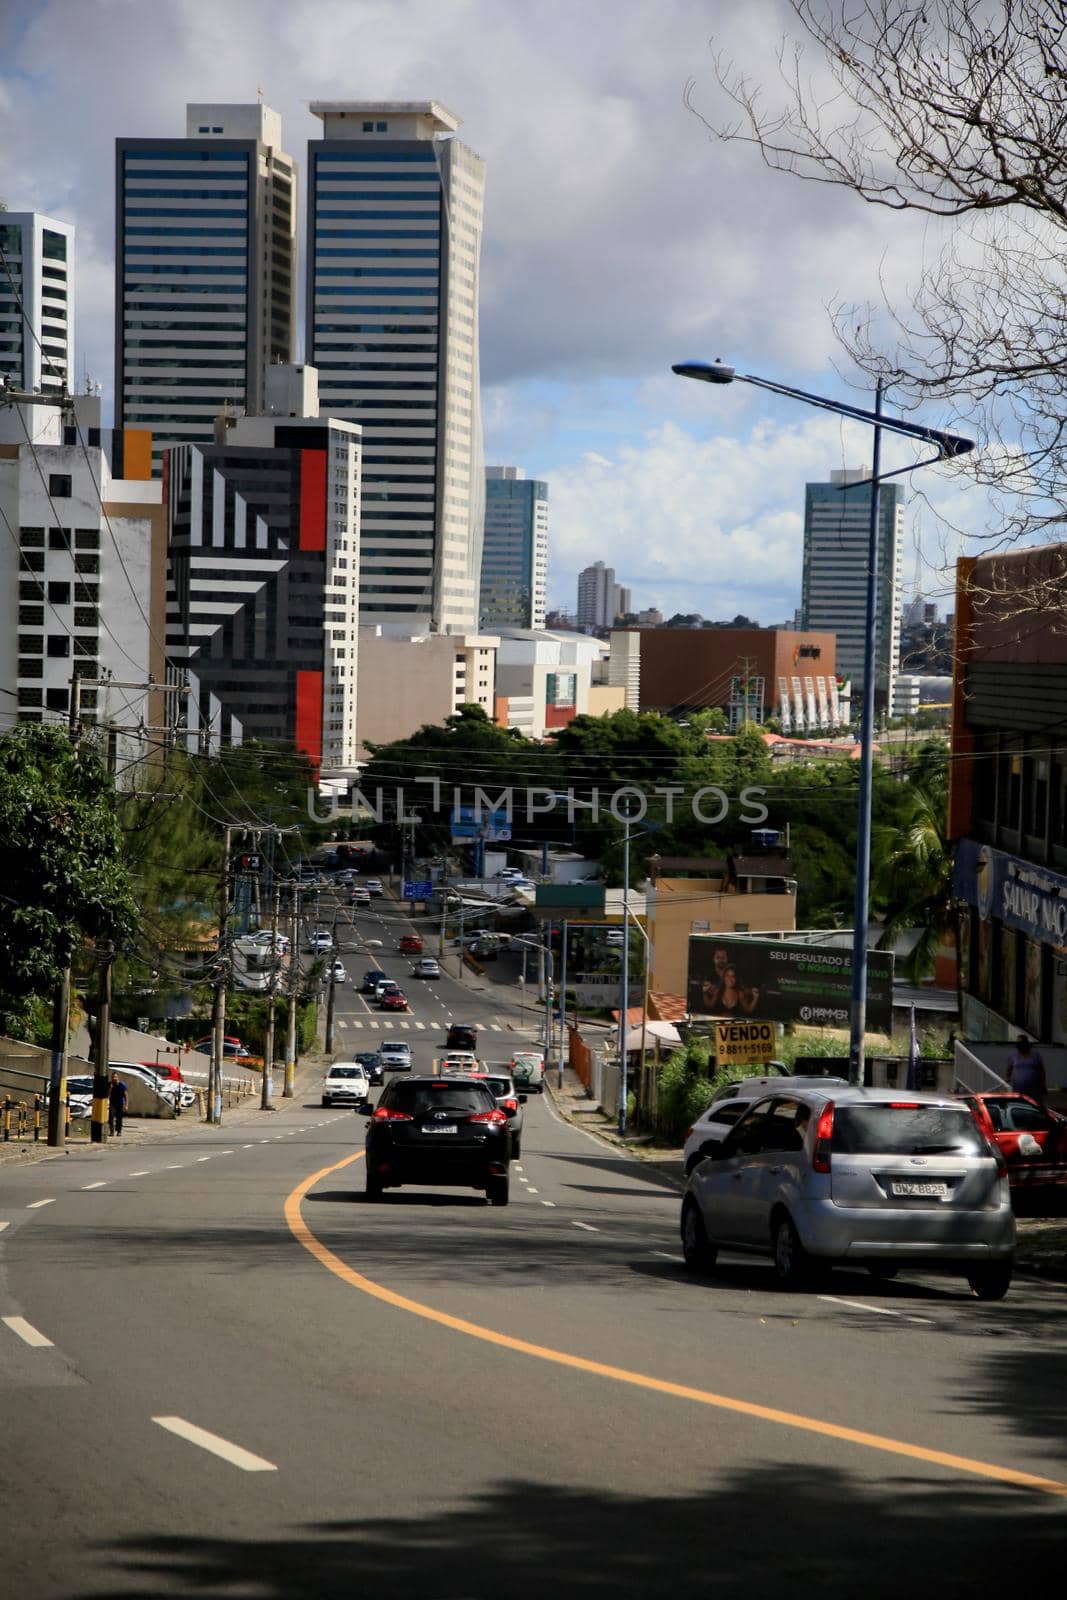 salvador, bahia, brazil - july 20, 2021: facade of residential building in the district of Stiep in the city of Salvador.